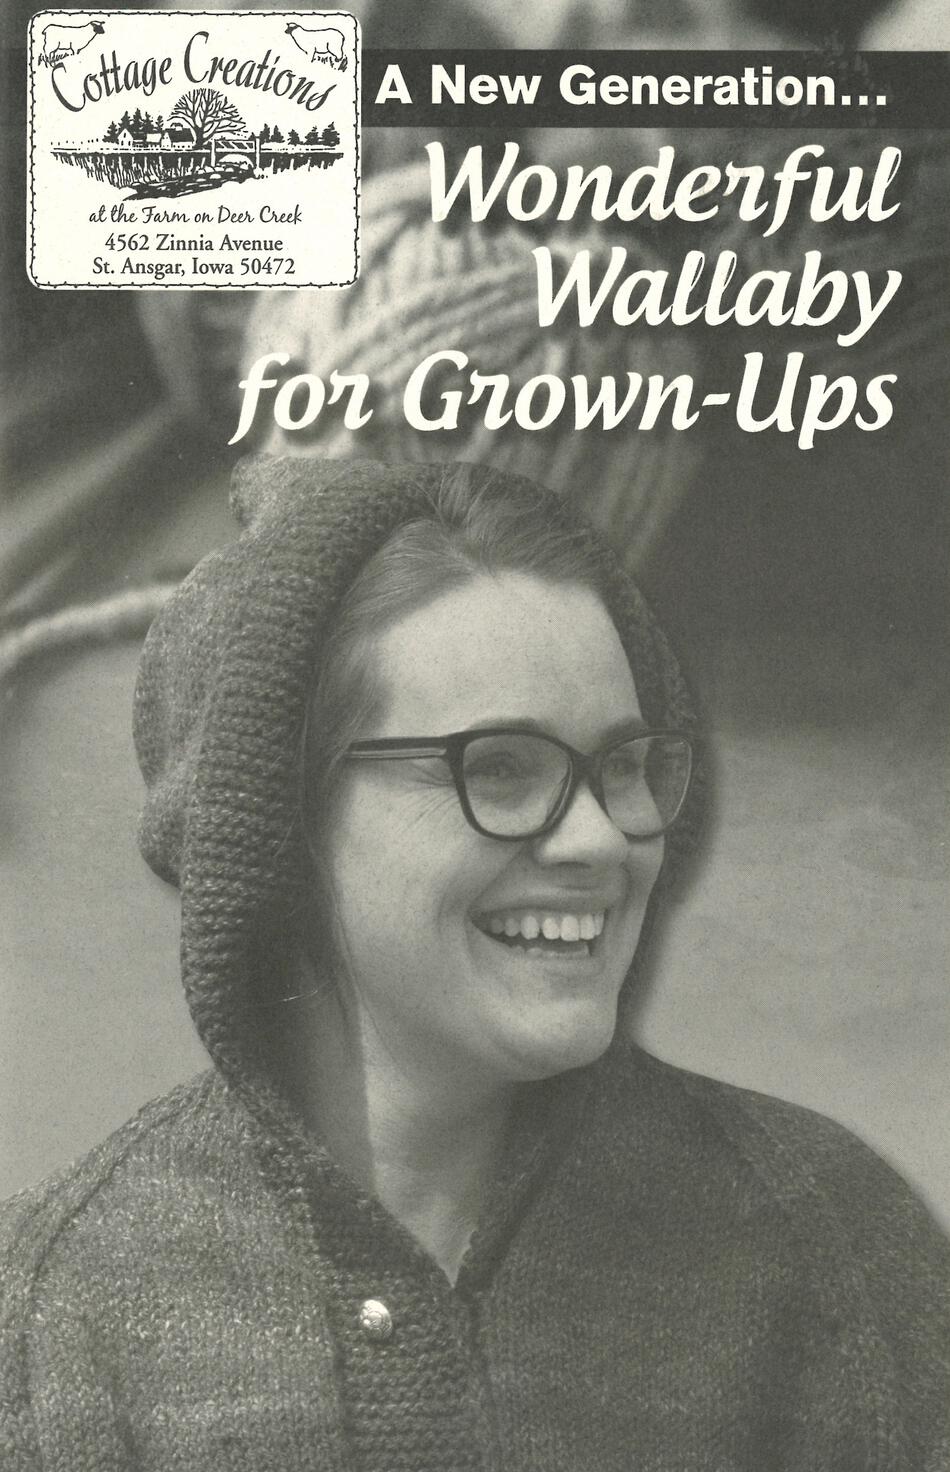 Knitting Books A New Generation Wonderful Wallaby for GrownUps